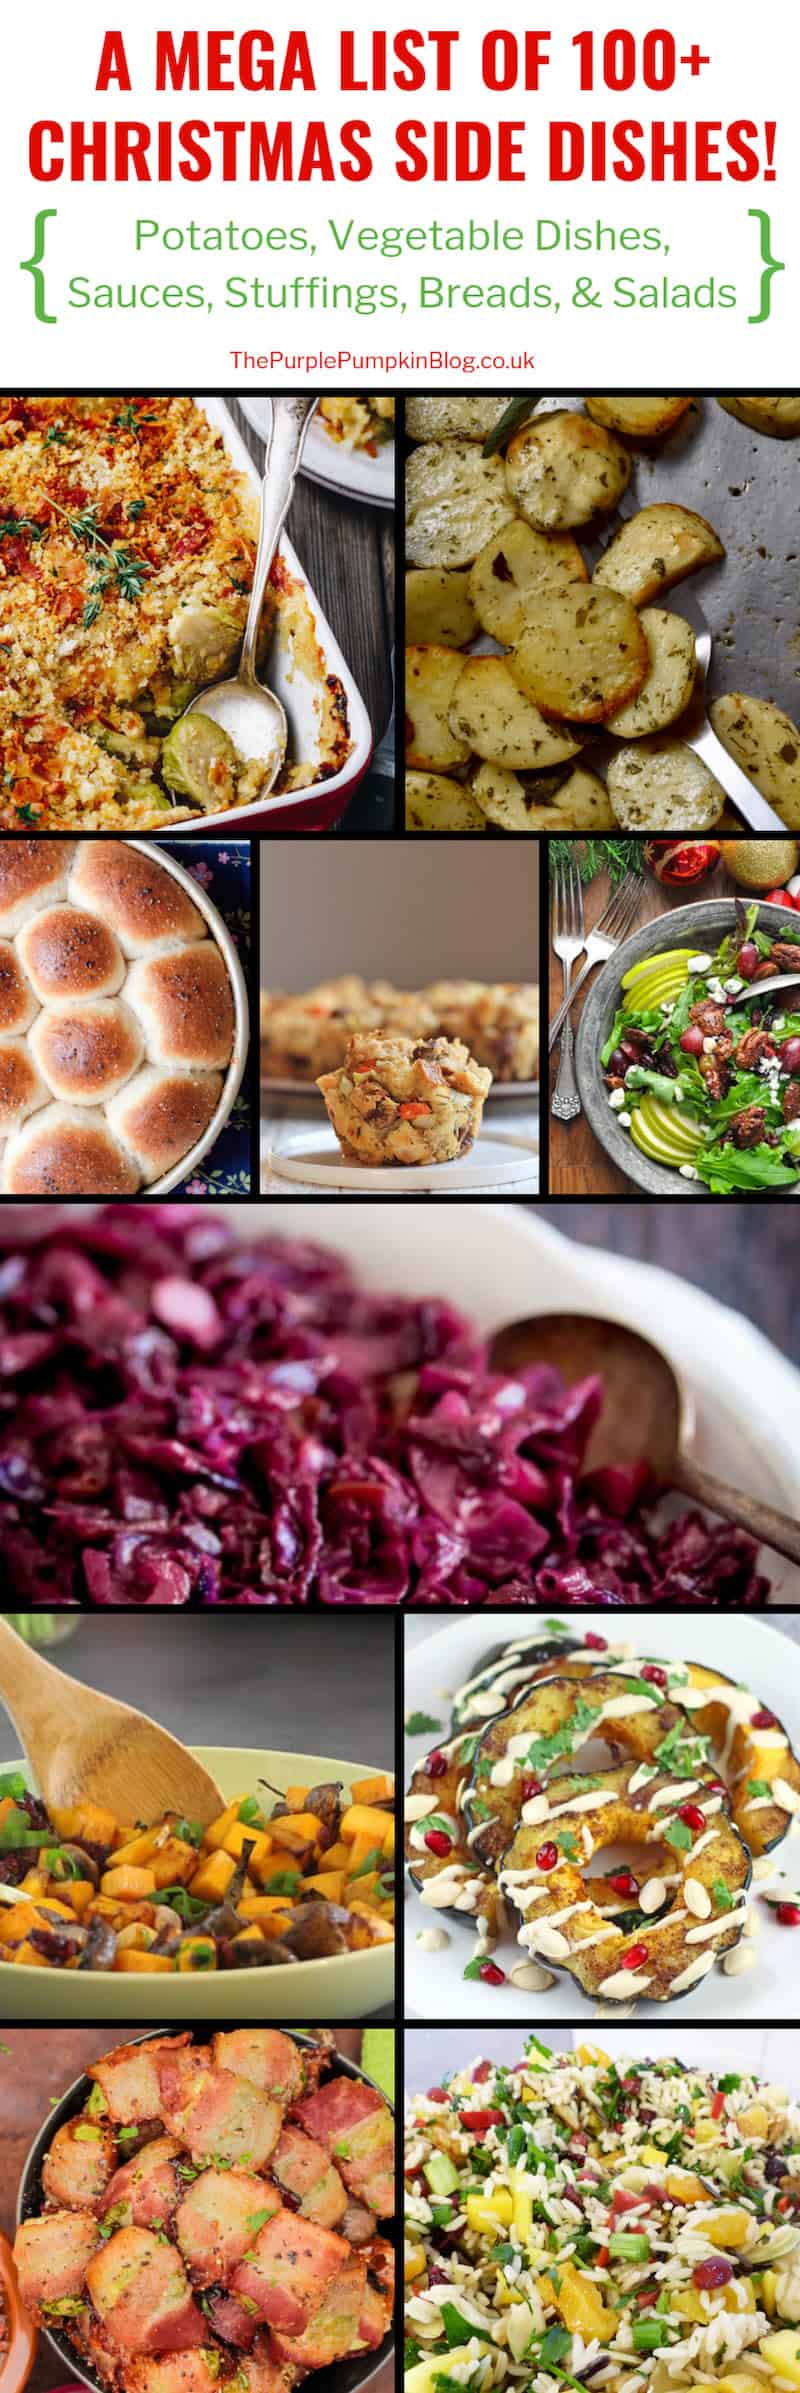 A mega list of 100+ Christmas Side Dishes, which include recipes for a variety of sides including potatoes, vegetables, sauces, breads, and salads. So if you are stuck in a rut with the same side dishes every Christmas, why not take a look through this list of recipes and switch things up a bit! #ChristmasSideDishes #Sides #ChristmasRecipes